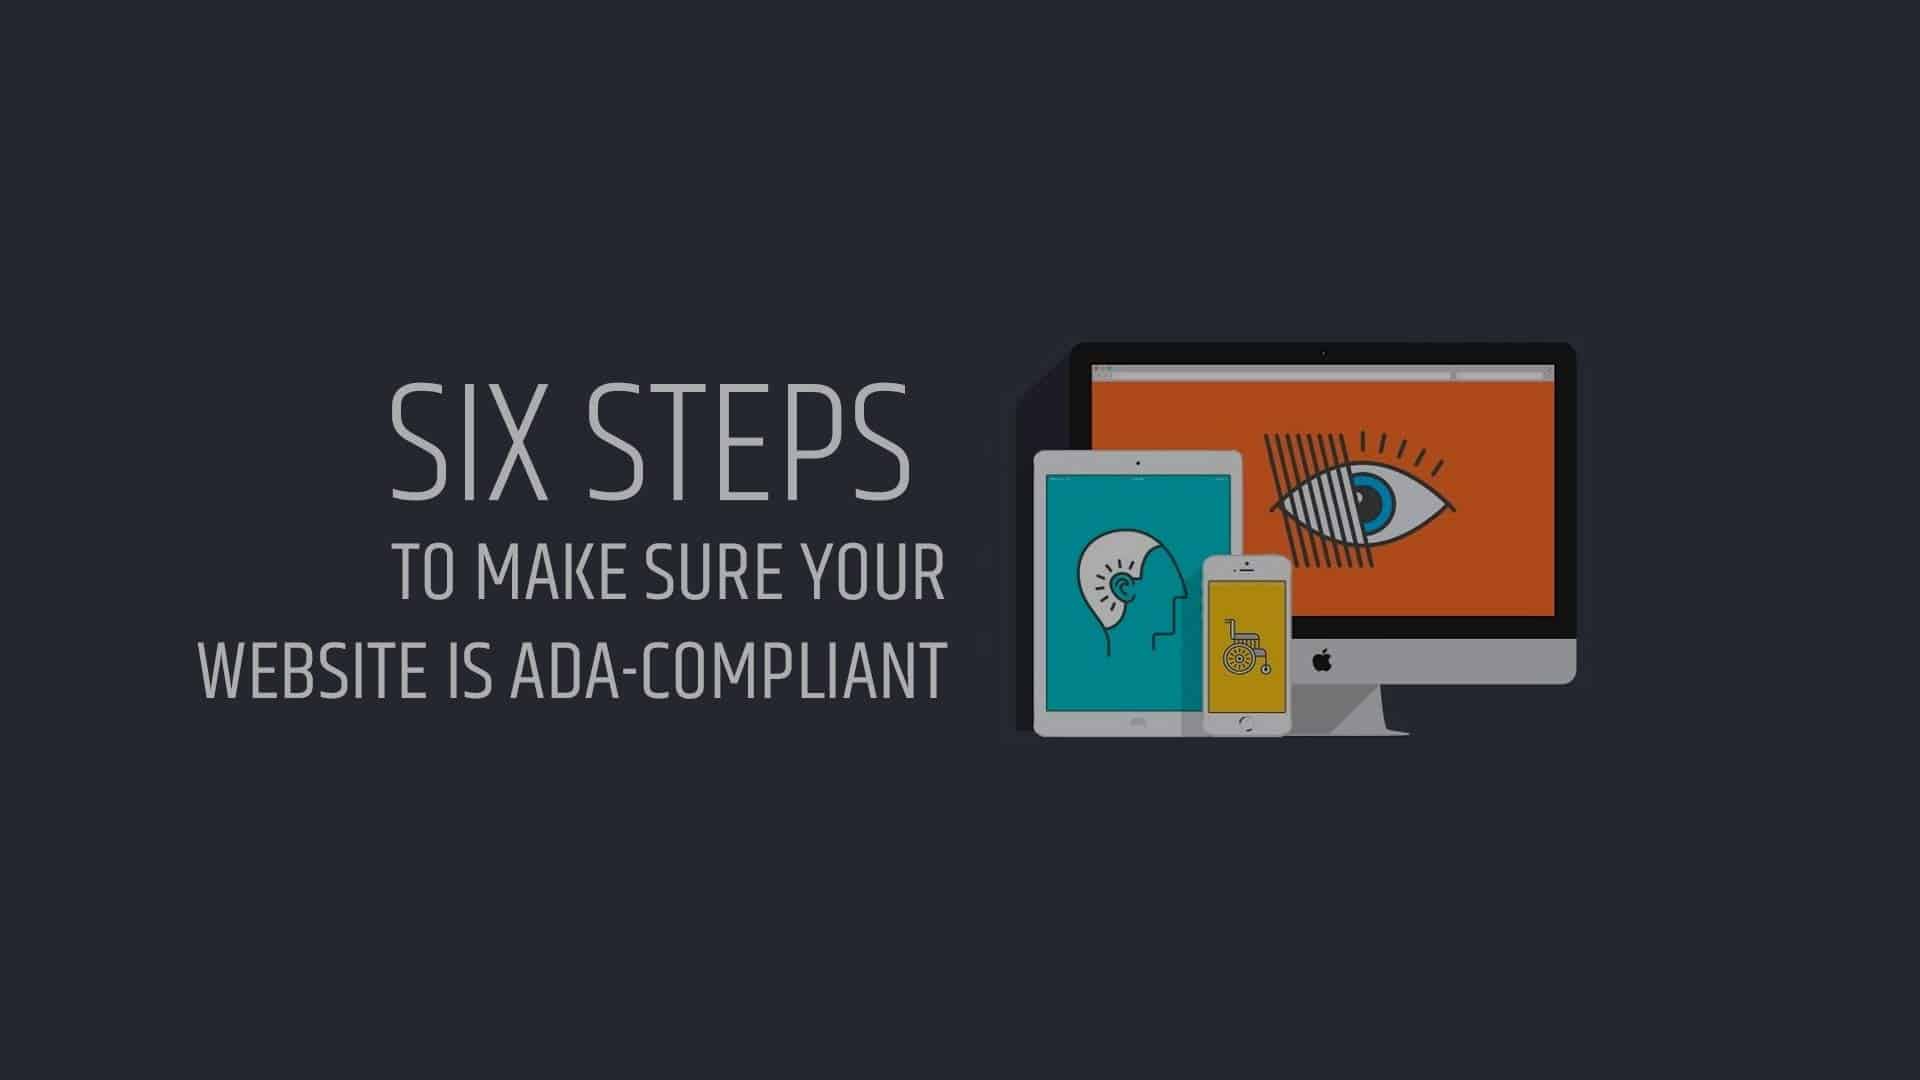 Six Steps to Make Sure Your Website is ADA-compliant